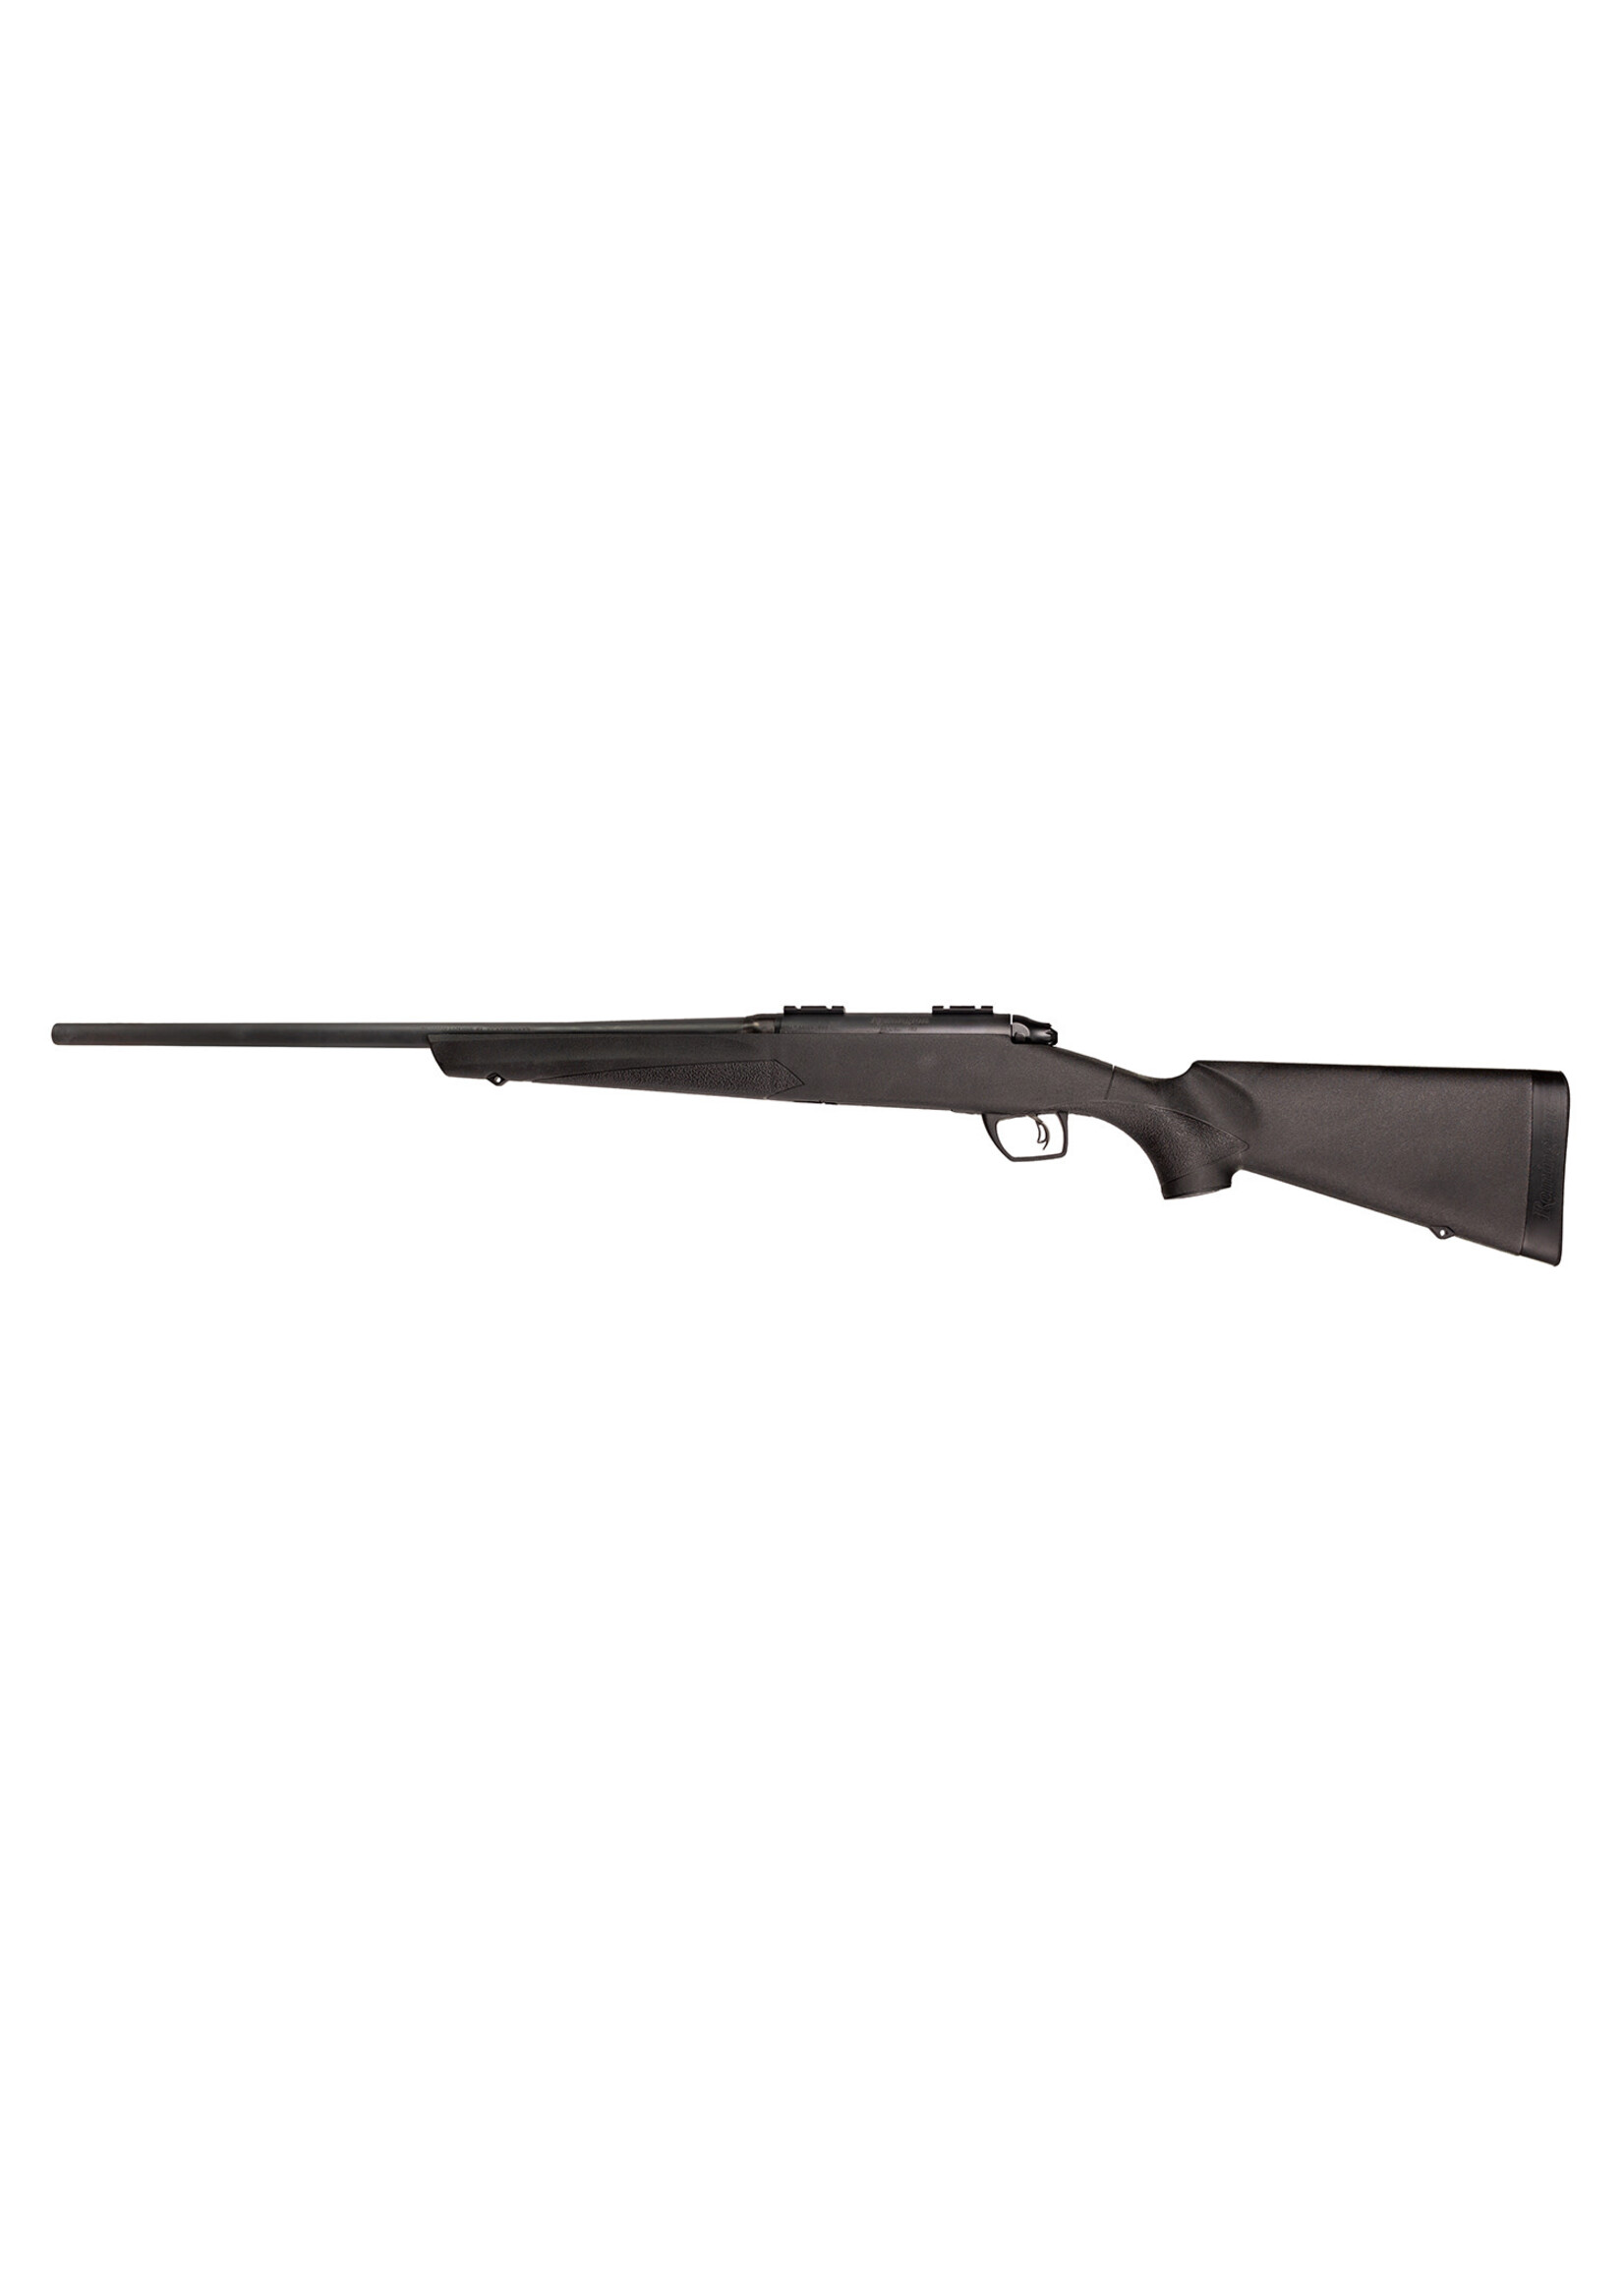 Remington Remington Firearms (New) R85840 700 SPS Full Size 223 Rem 4+1 26" Matte Black Steel Barrel & Drilled & Tapped Carbon Steel Receiver, Black Synthetic Stock